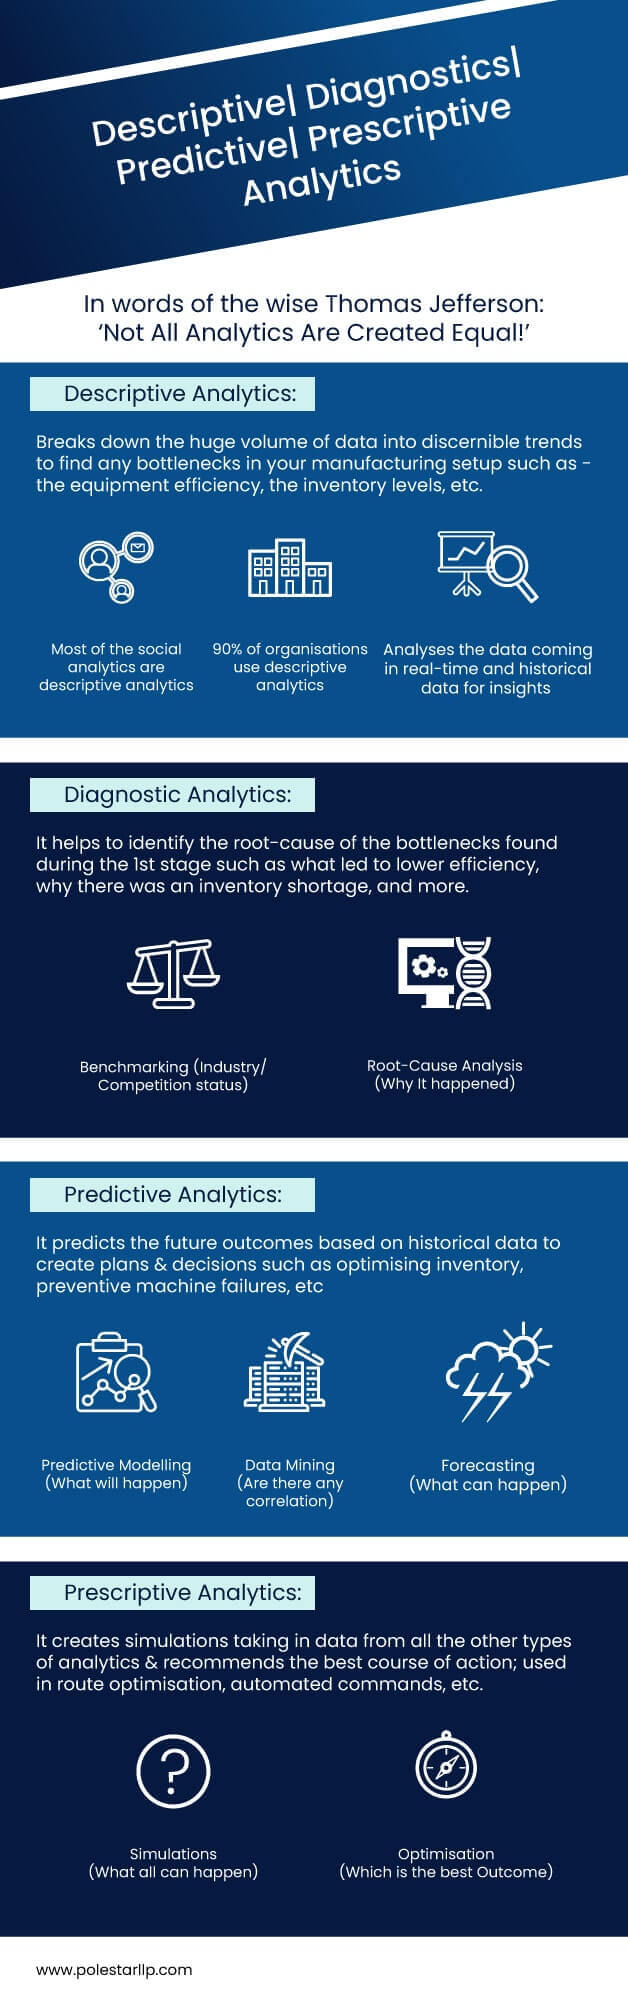 4 Types of Analytics possible on Industrial Data